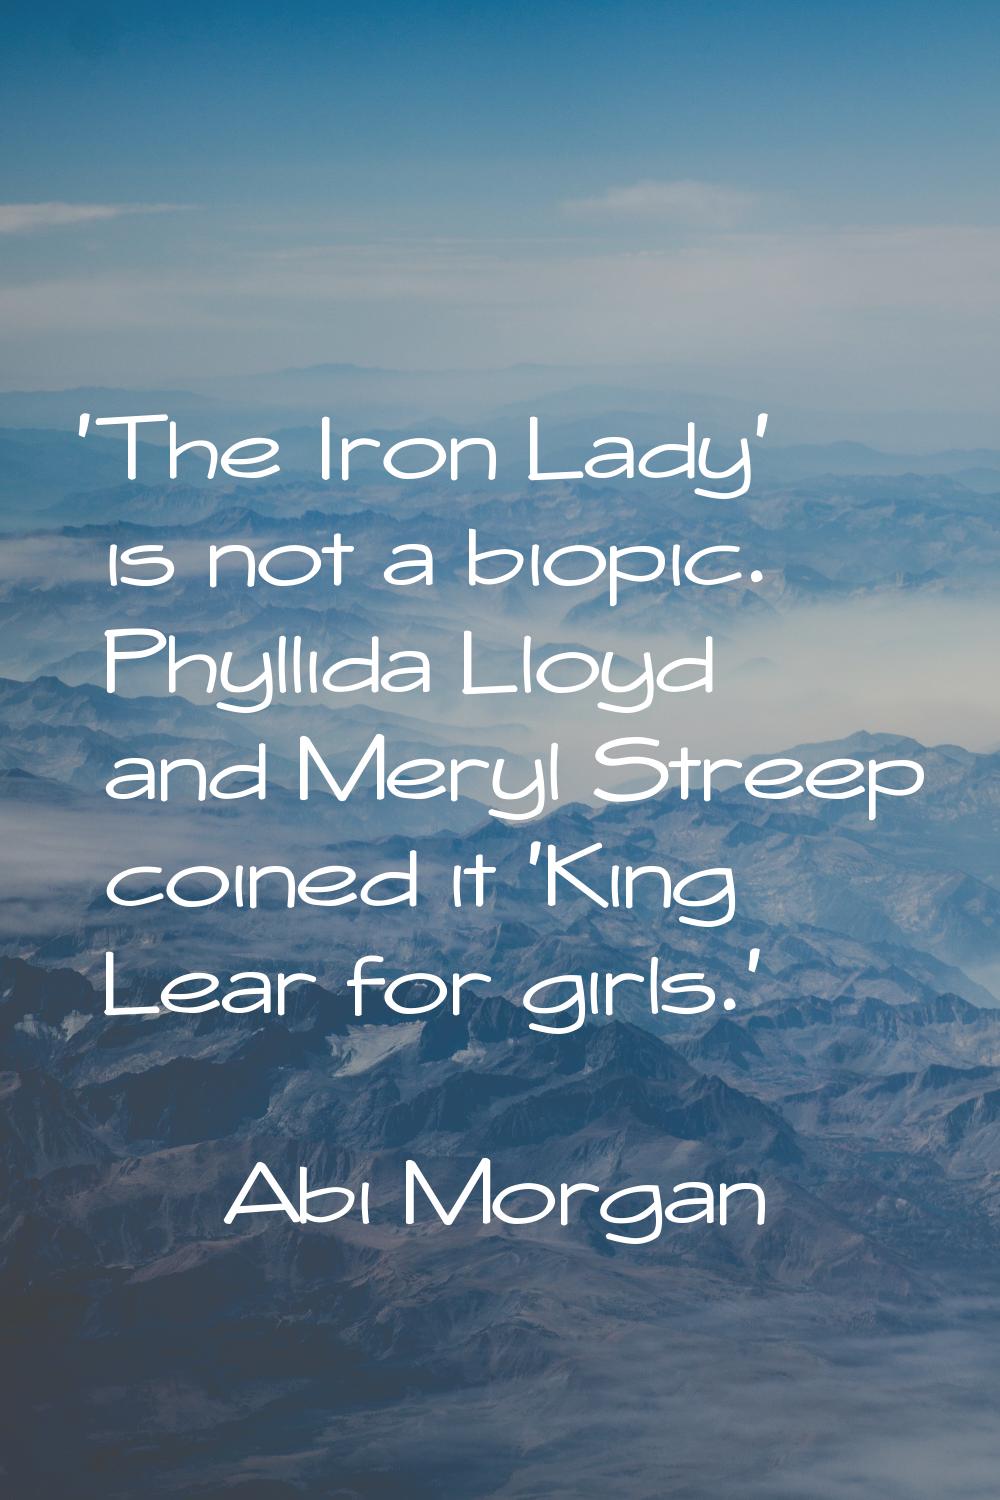 'The Iron Lady' is not a biopic. Phyllida Lloyd and Meryl Streep coined it 'King Lear for girls.'